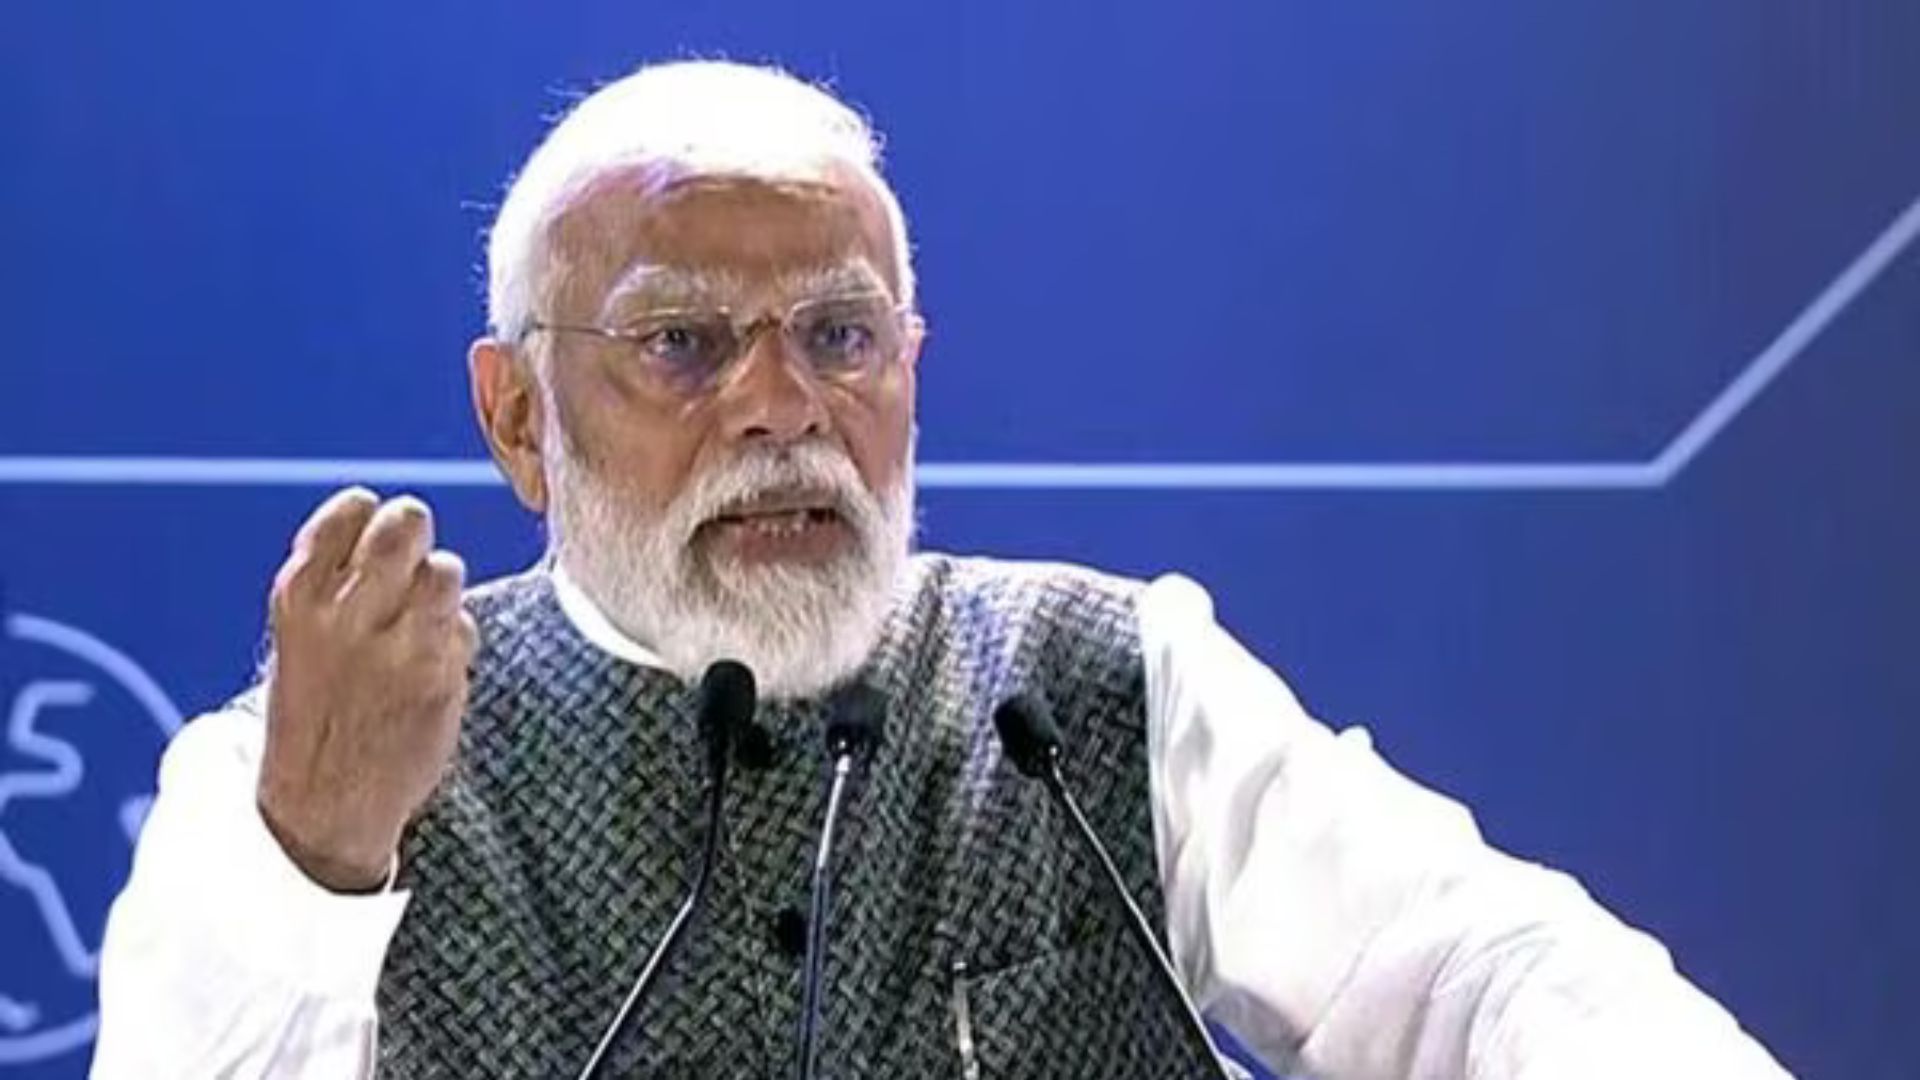 PM Modi interacts with top Indian gamers to develop ‘Swachh Bharat’ game